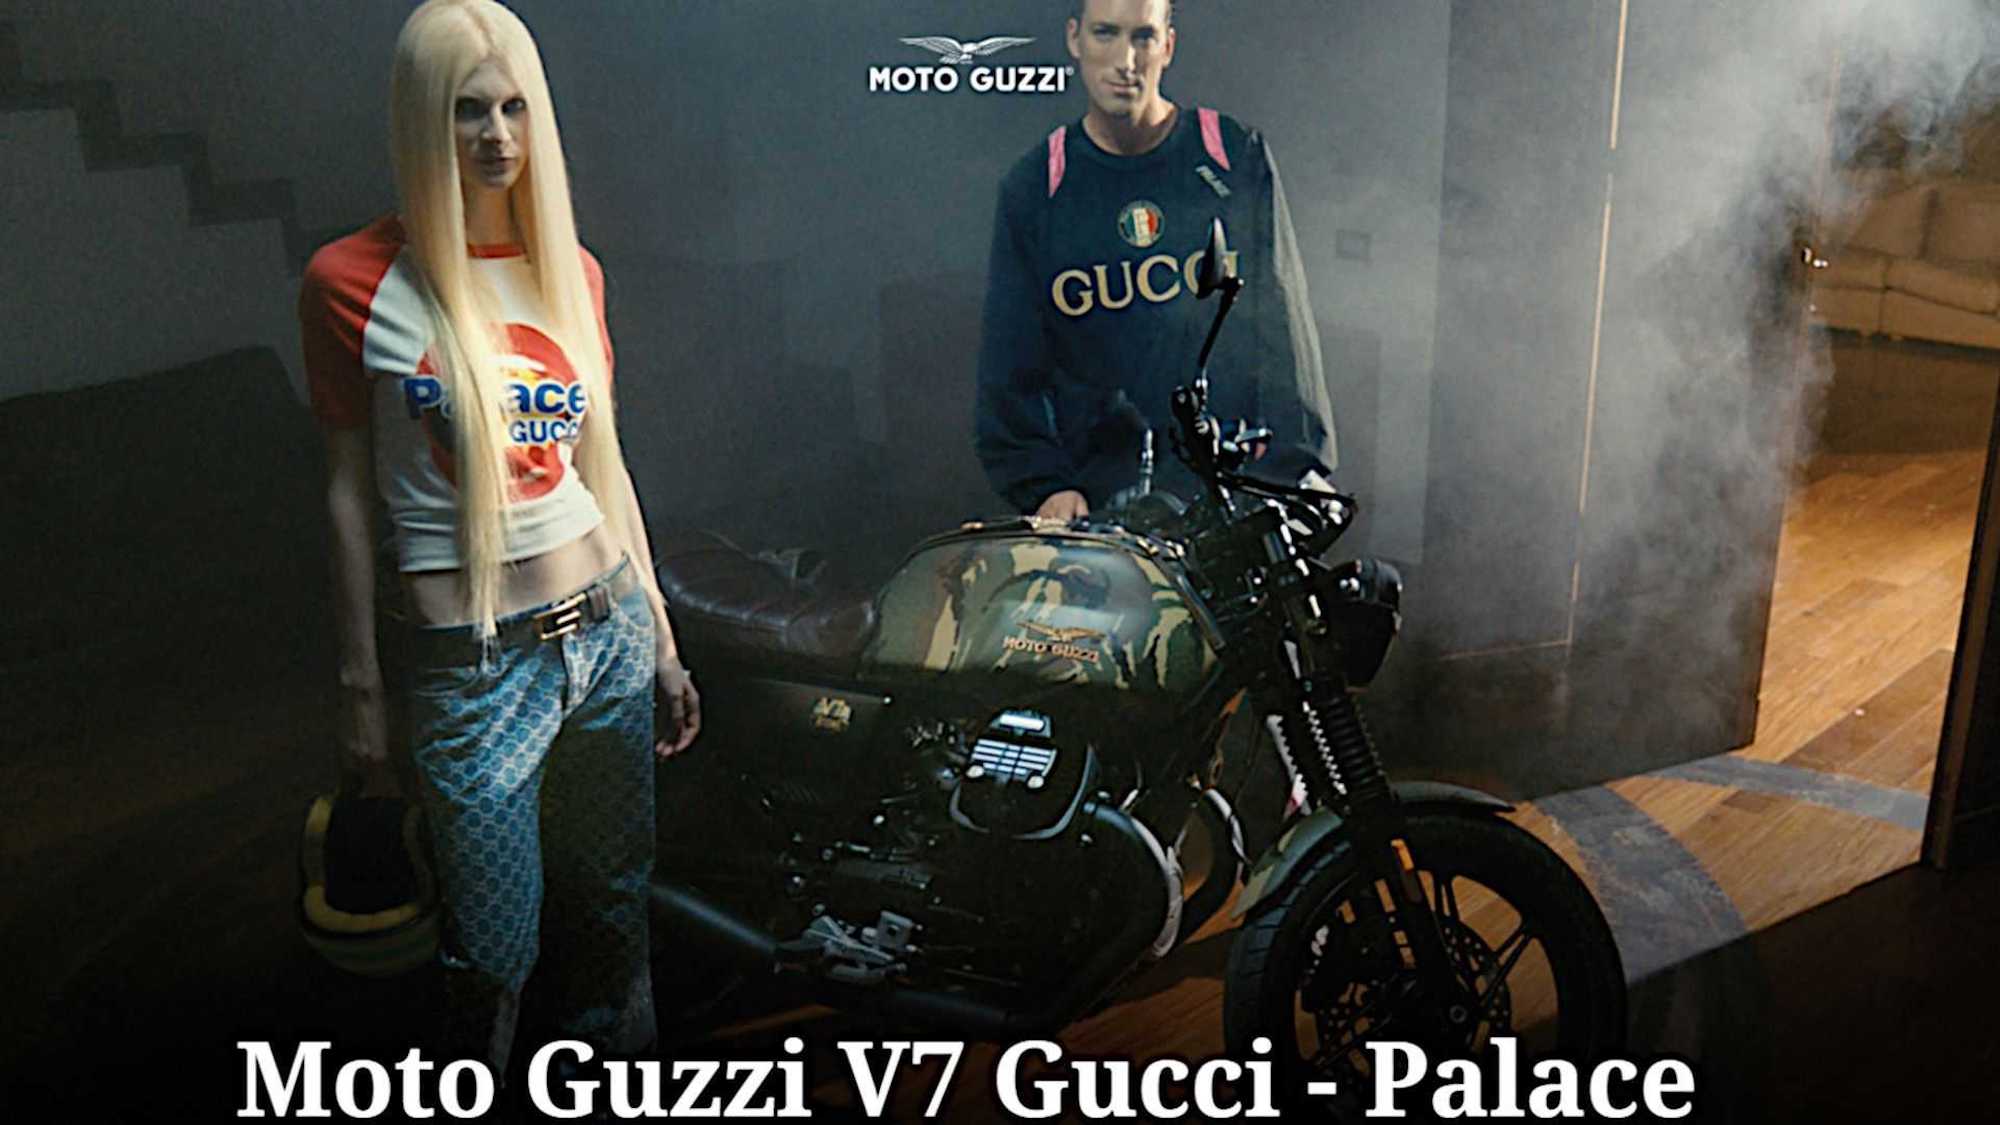 The Palace Gucci Moto Guzzi V7 Stone Limited Edition, created in collaboration with Gucci and Palace Skateboards. That lady doesn't look particularly happy, but we're thinking the grin will come when she puts on some good gear and gets out on the road. Media sourced from RideApart. 